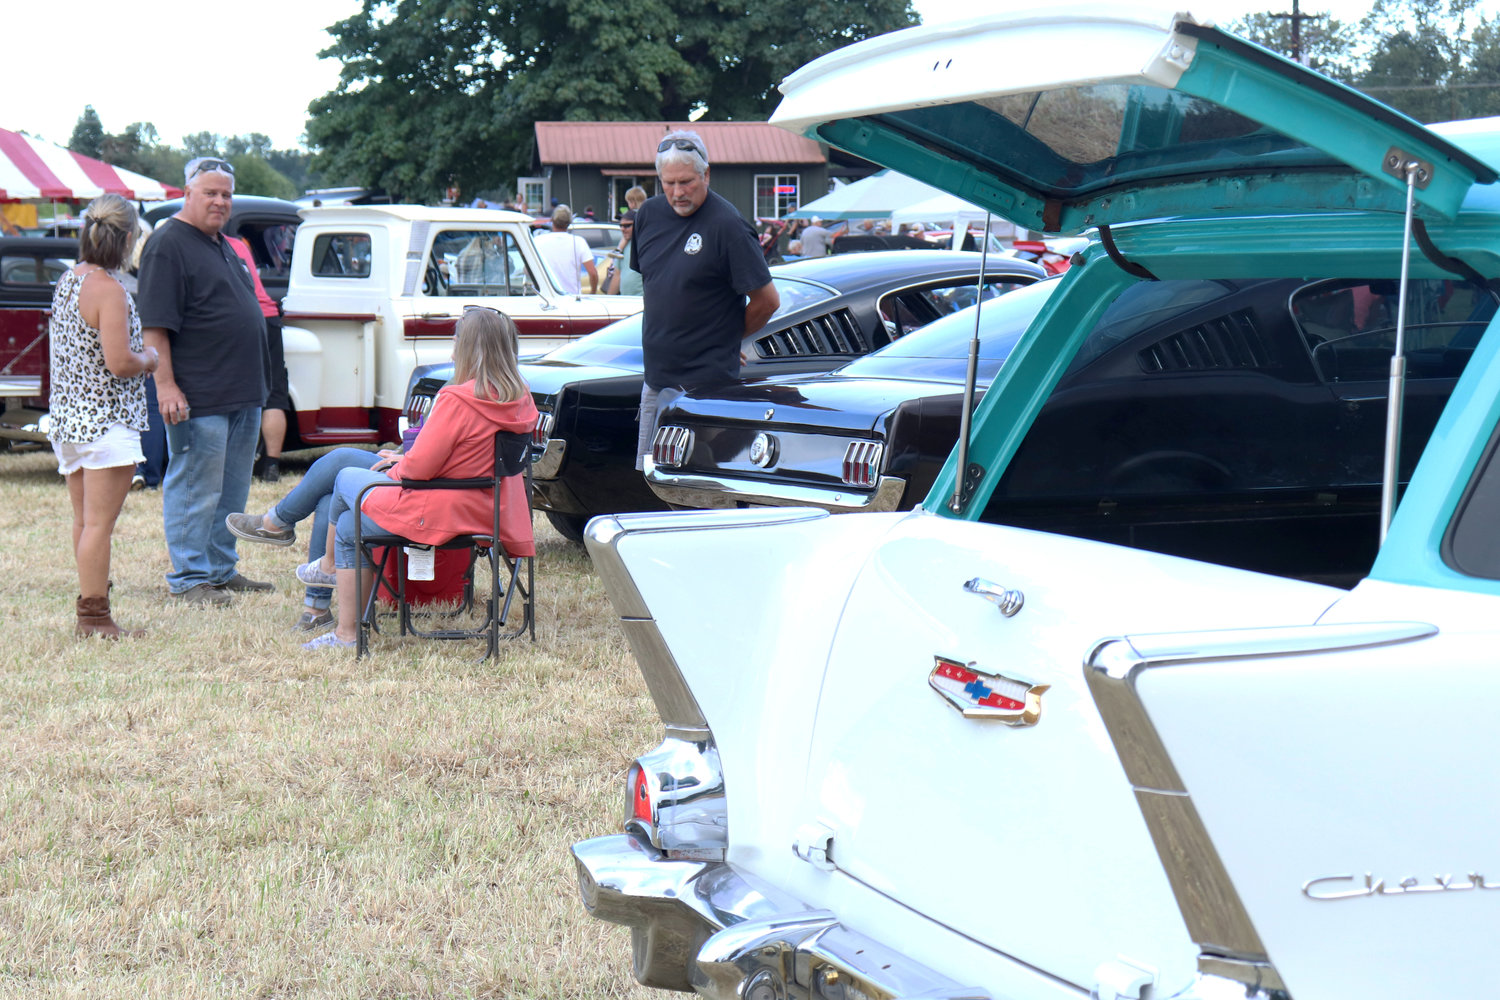 People tailgate beside their vehicles at the Adna Camp & Cruise Car Show in Adna on Friday.